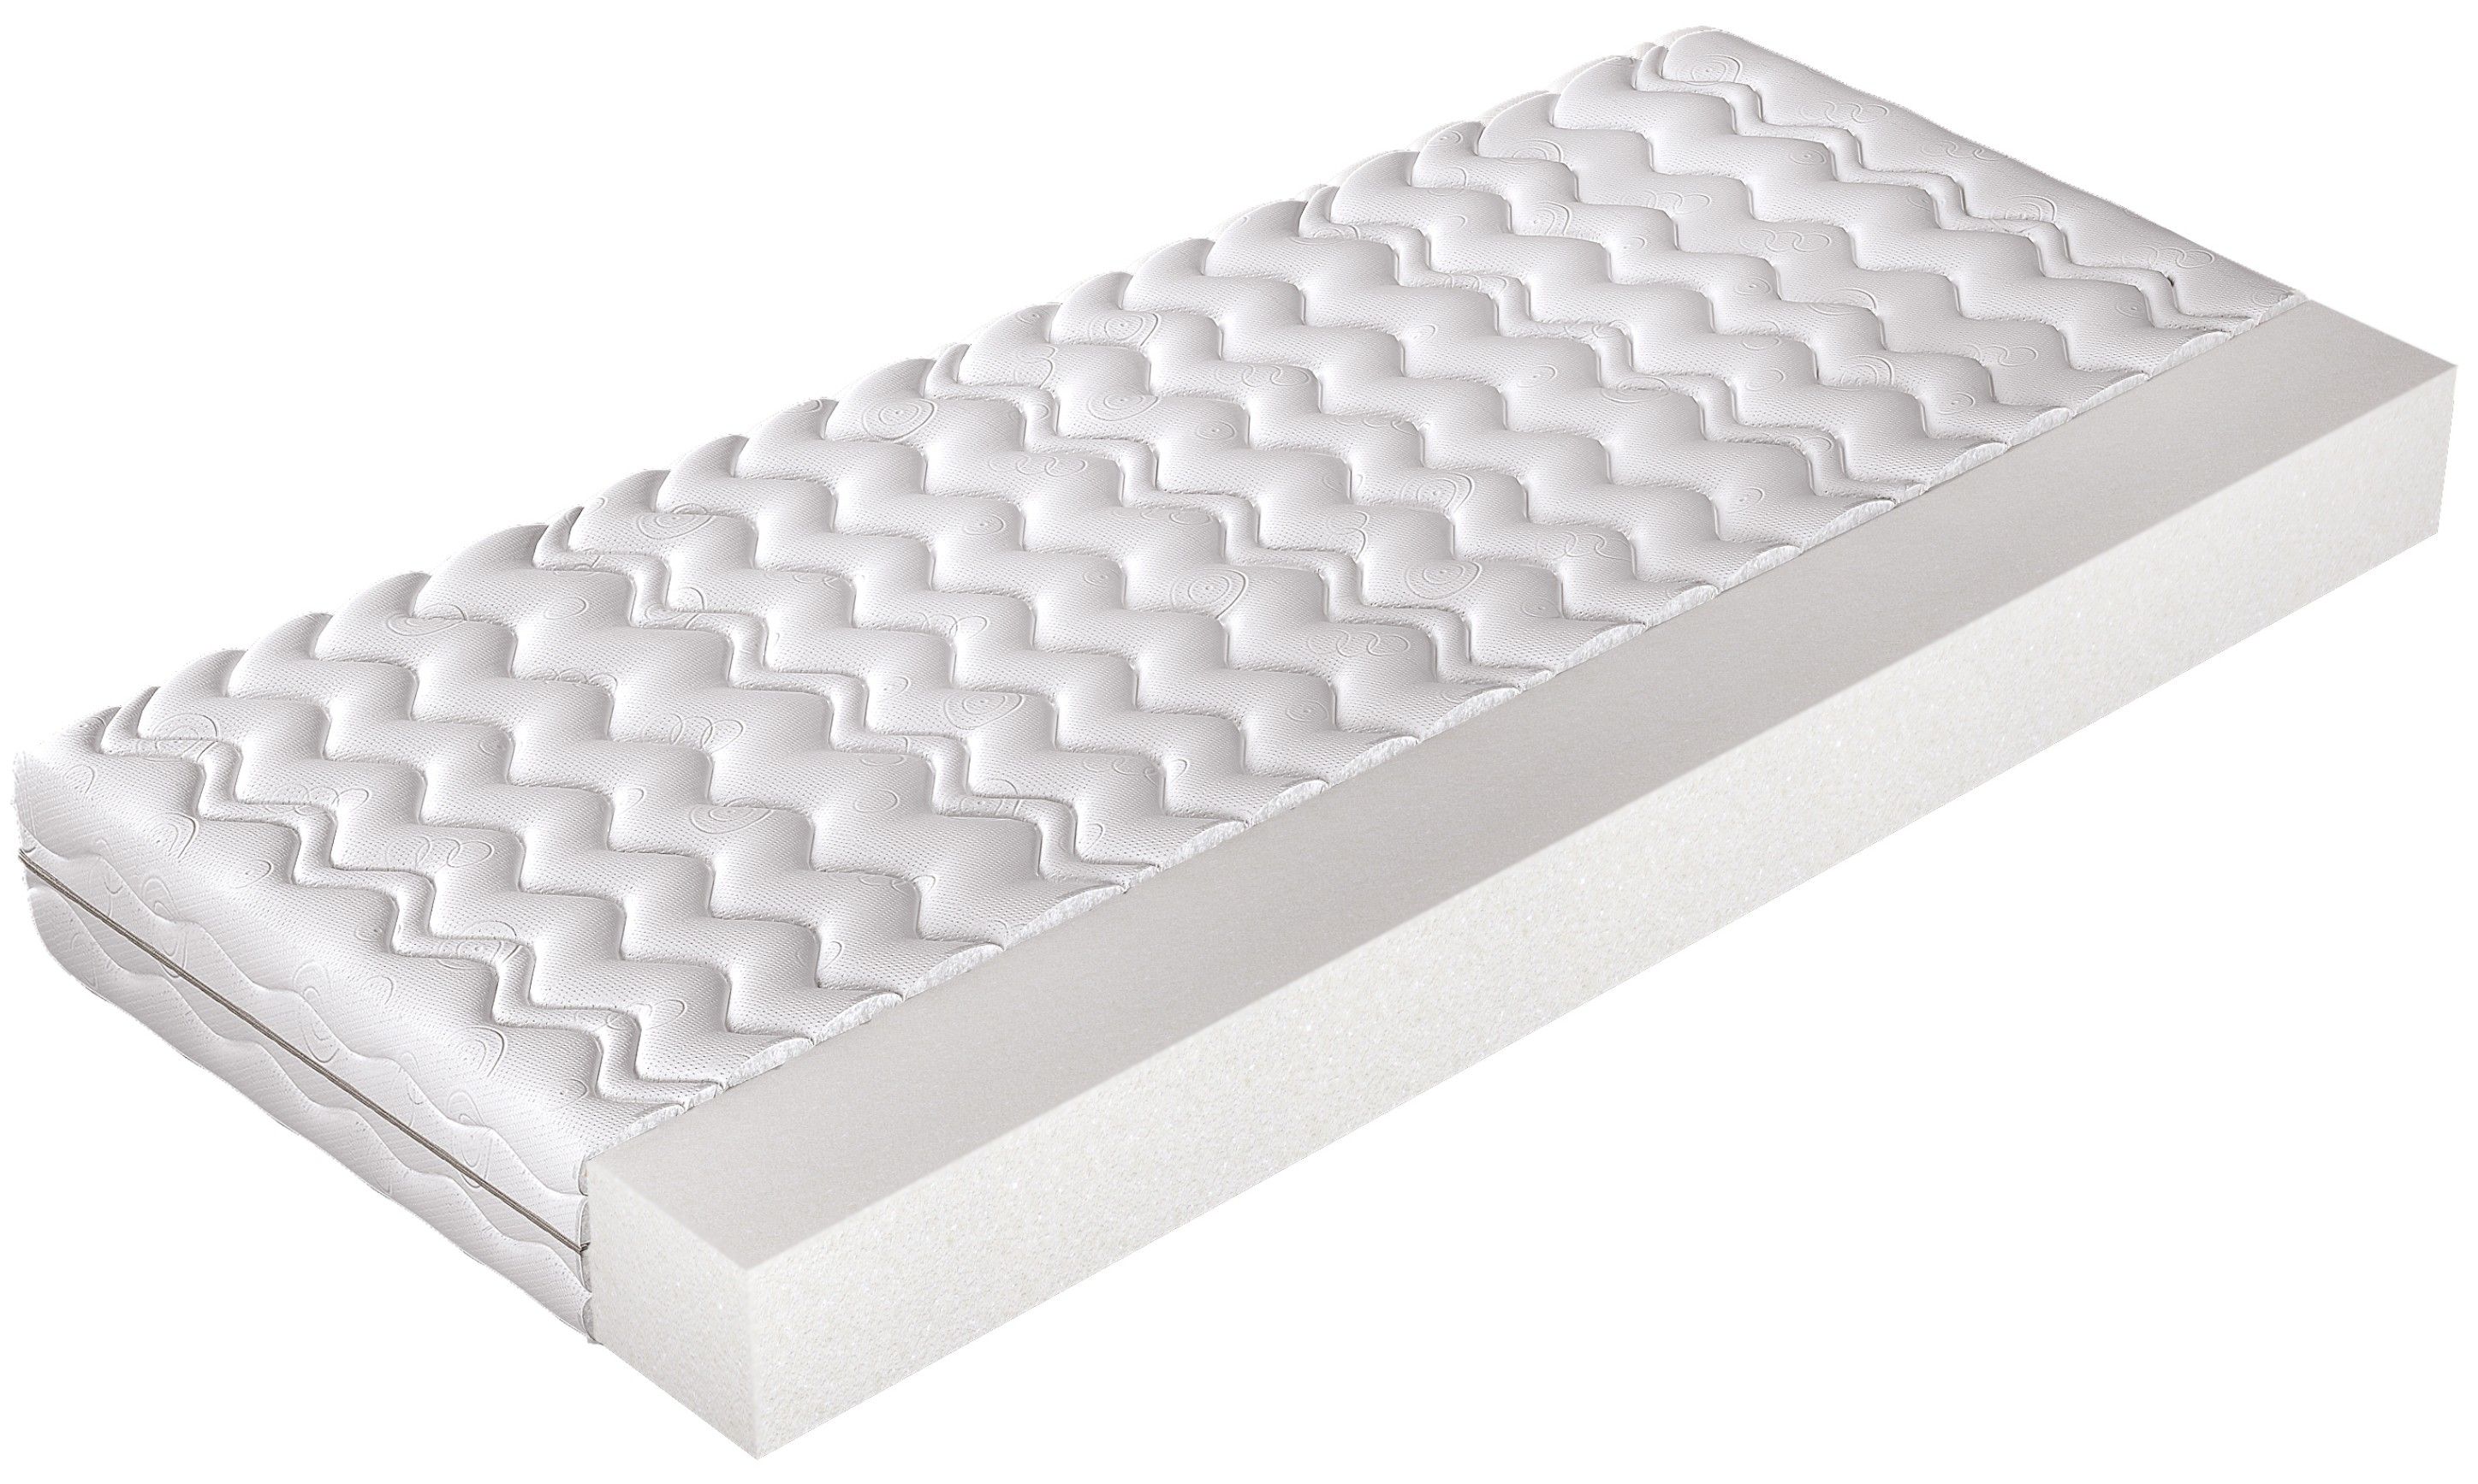 Materac STANDARD 80x170 COMFORTEO piankowy 9 cm - OUTLET - 30%